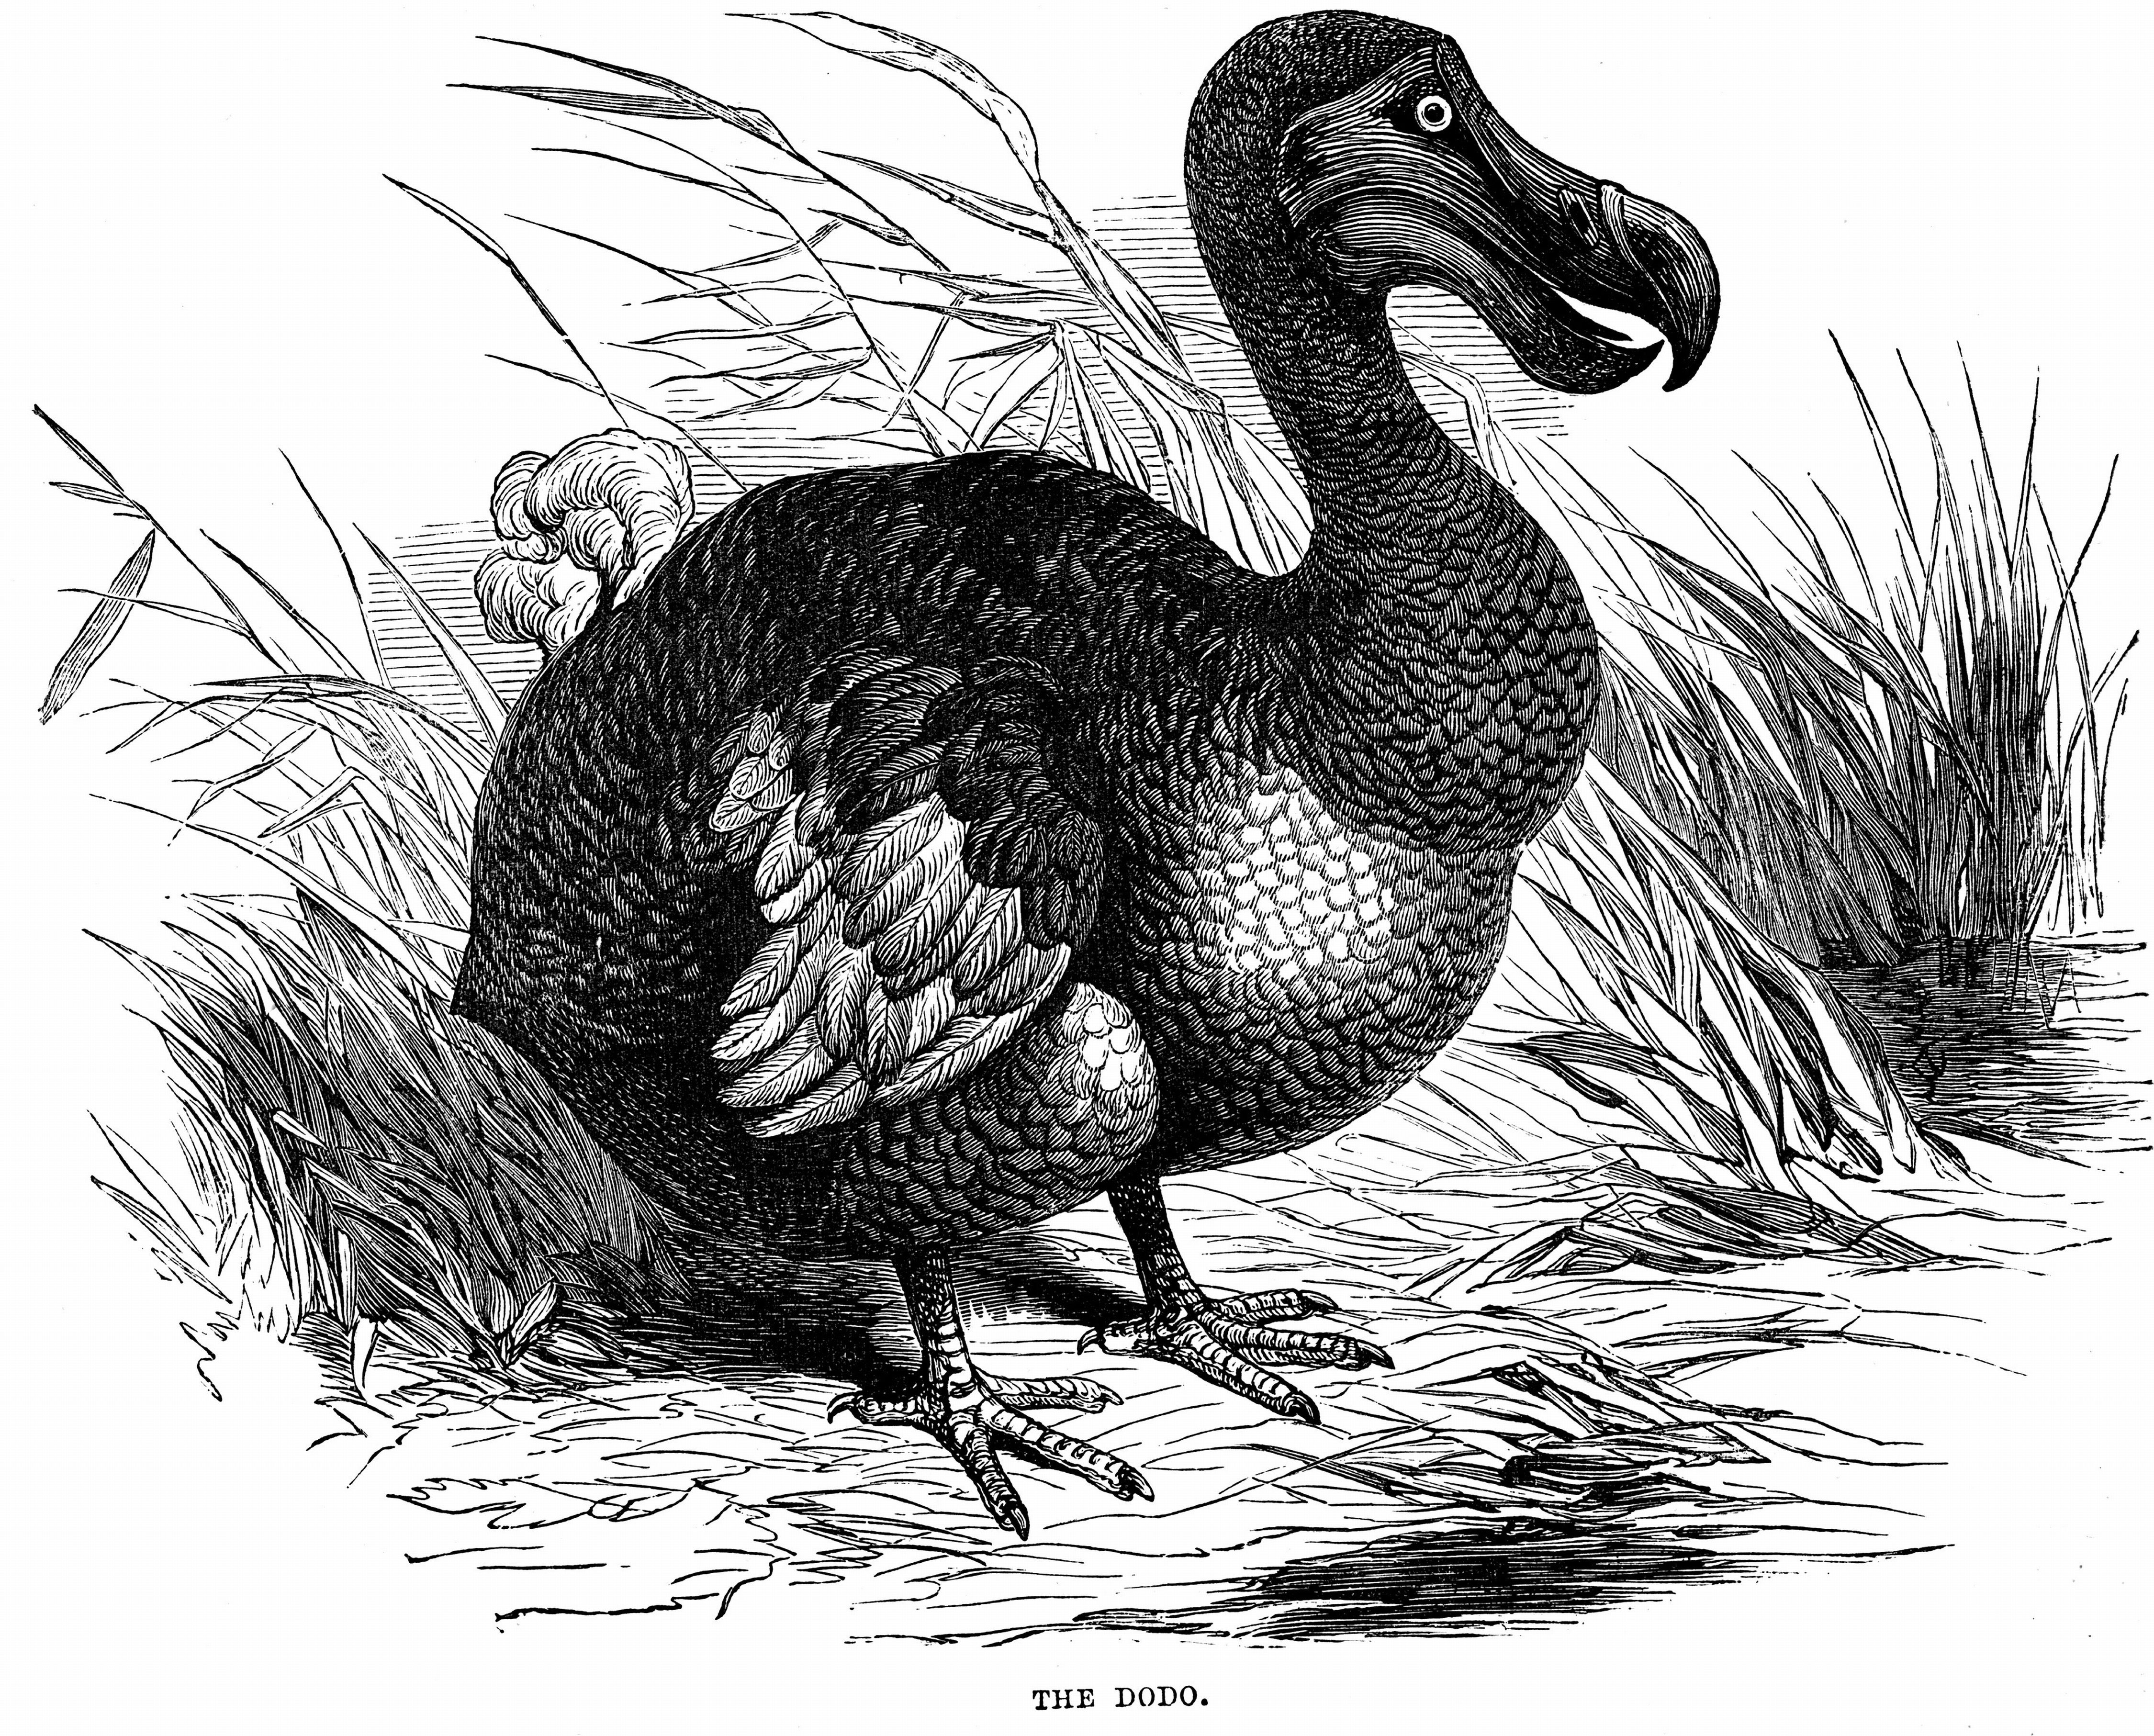 Dodo - Raphus cucullatus, formerly Didus ineptus - extinct flightless bird from Madagascar. First observed by Portuguese sailors in about 1507, by 1681 the Dodo was extinct due to a combination of circumstances including killing for food by men, introduct